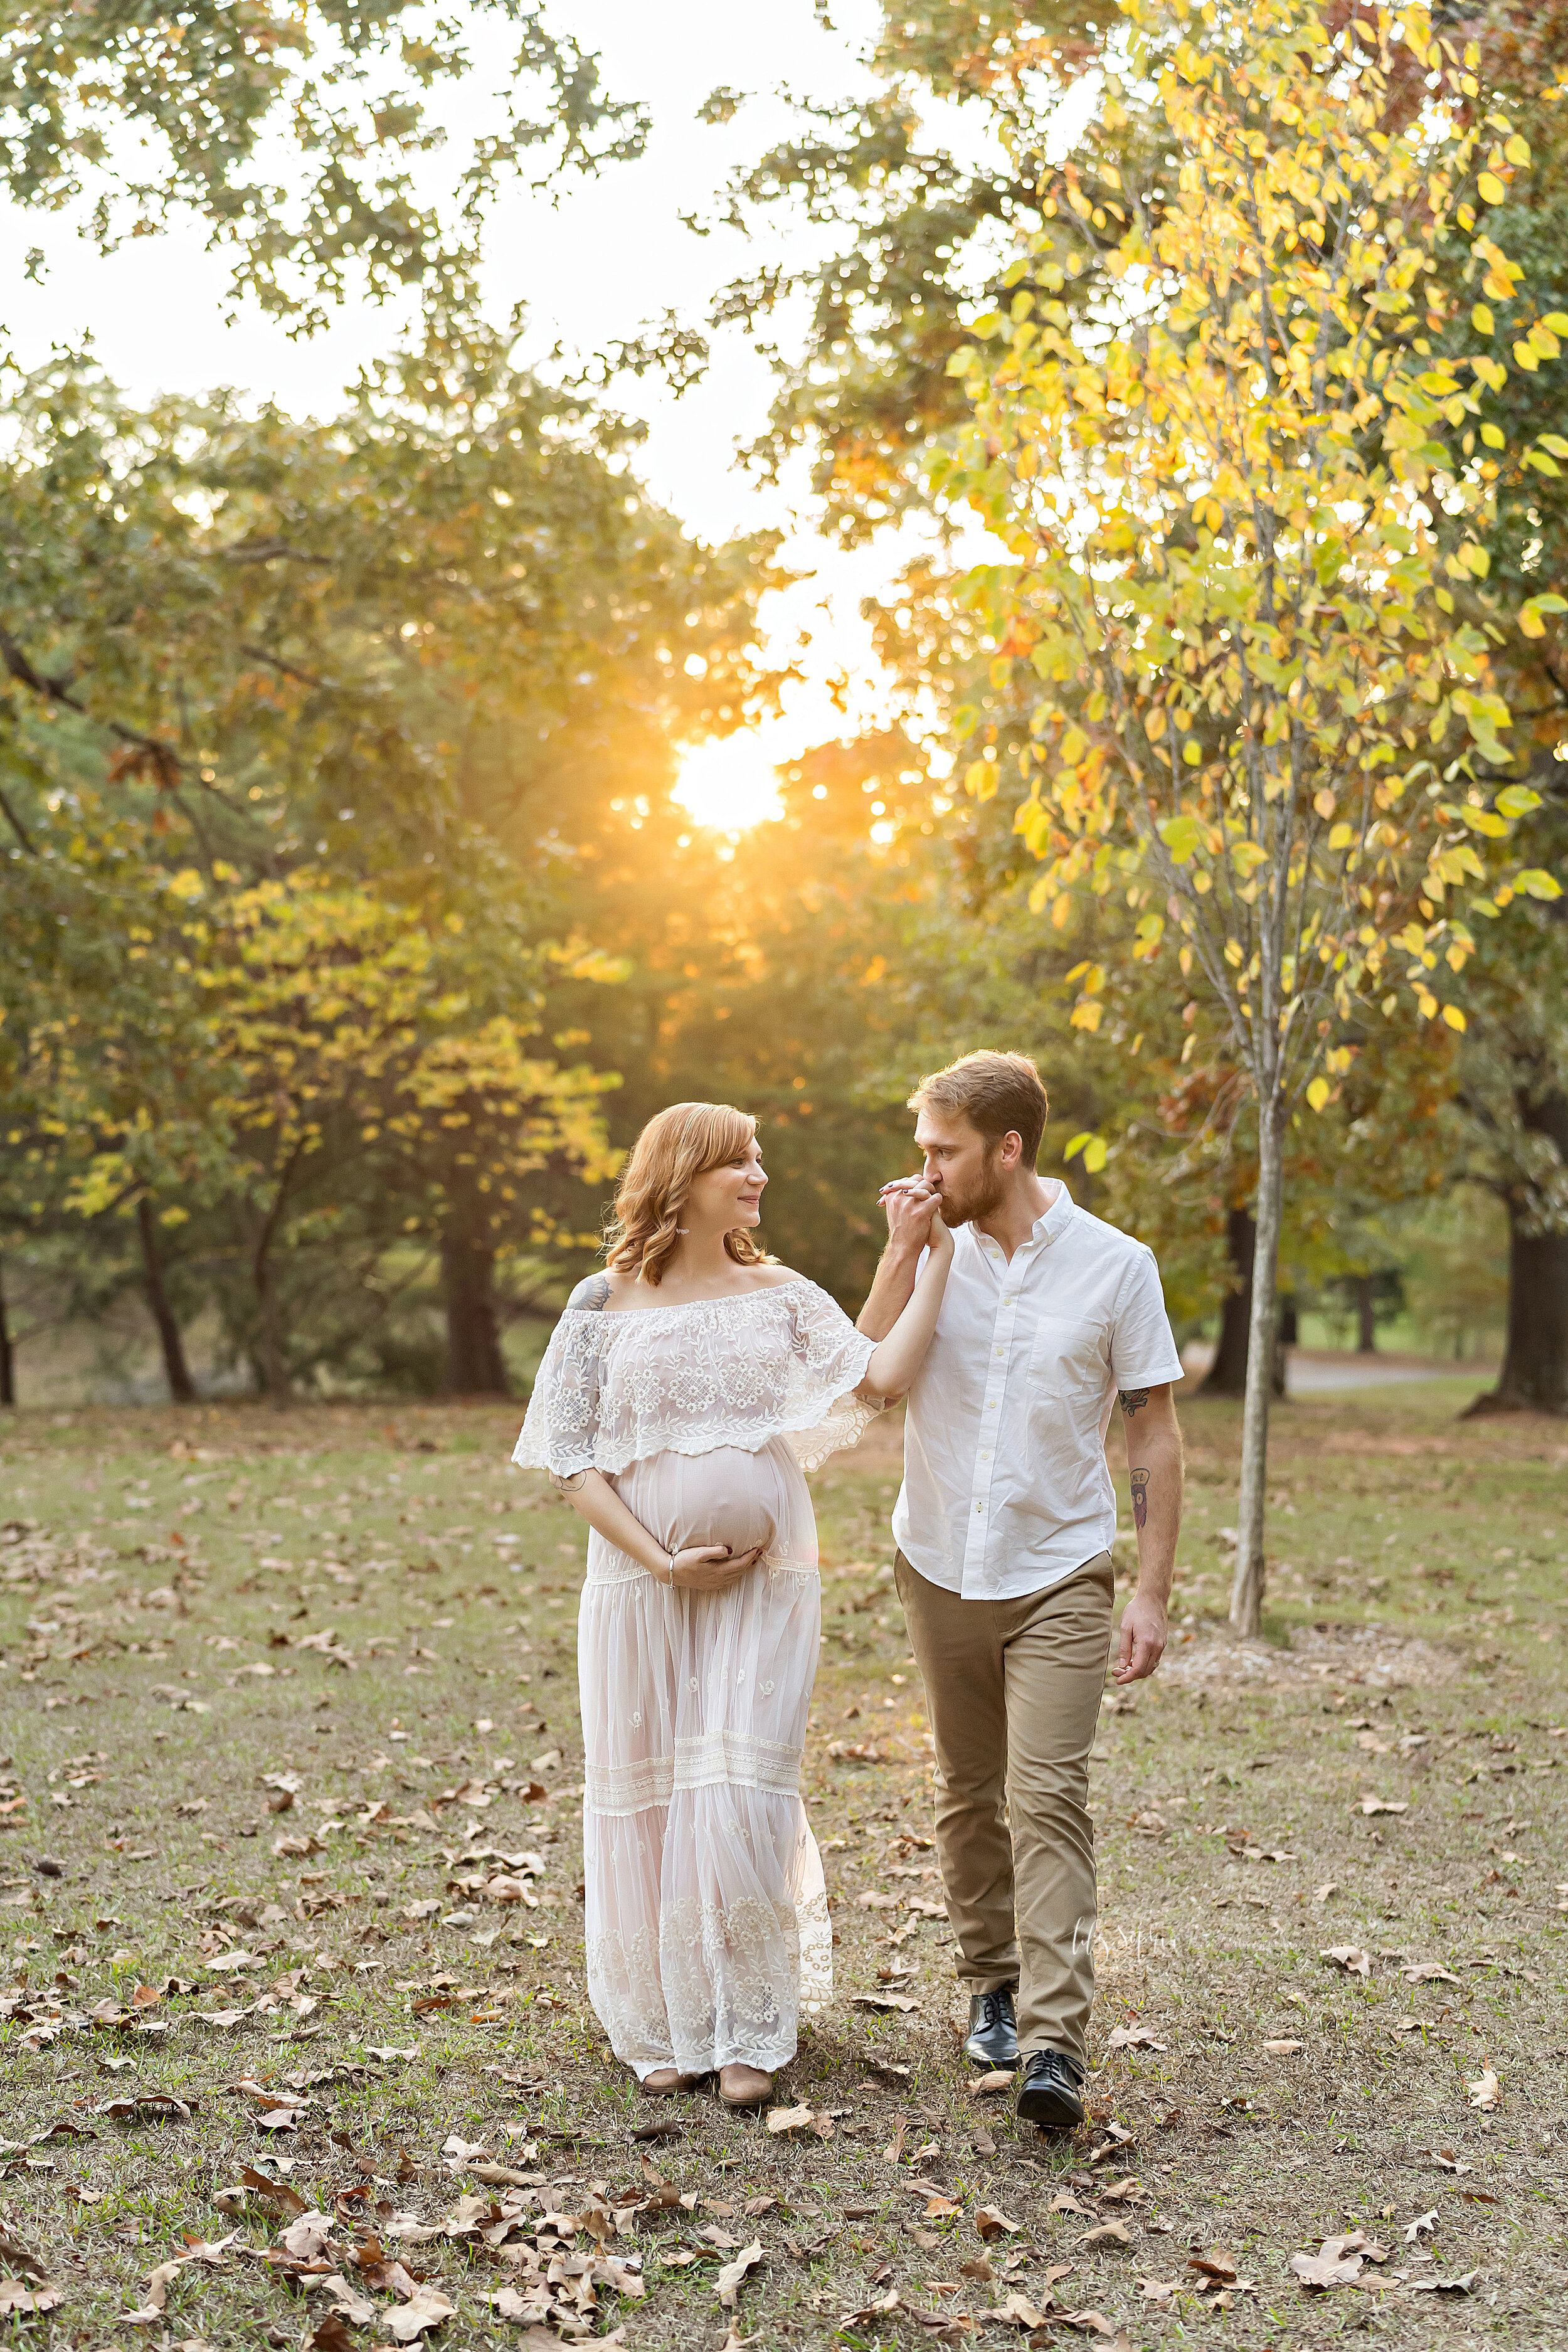  Maternity photograph of a husband and wife as they walk through an Atlanta park at sunset during autumn and the husband kisses his wife’s hand. 